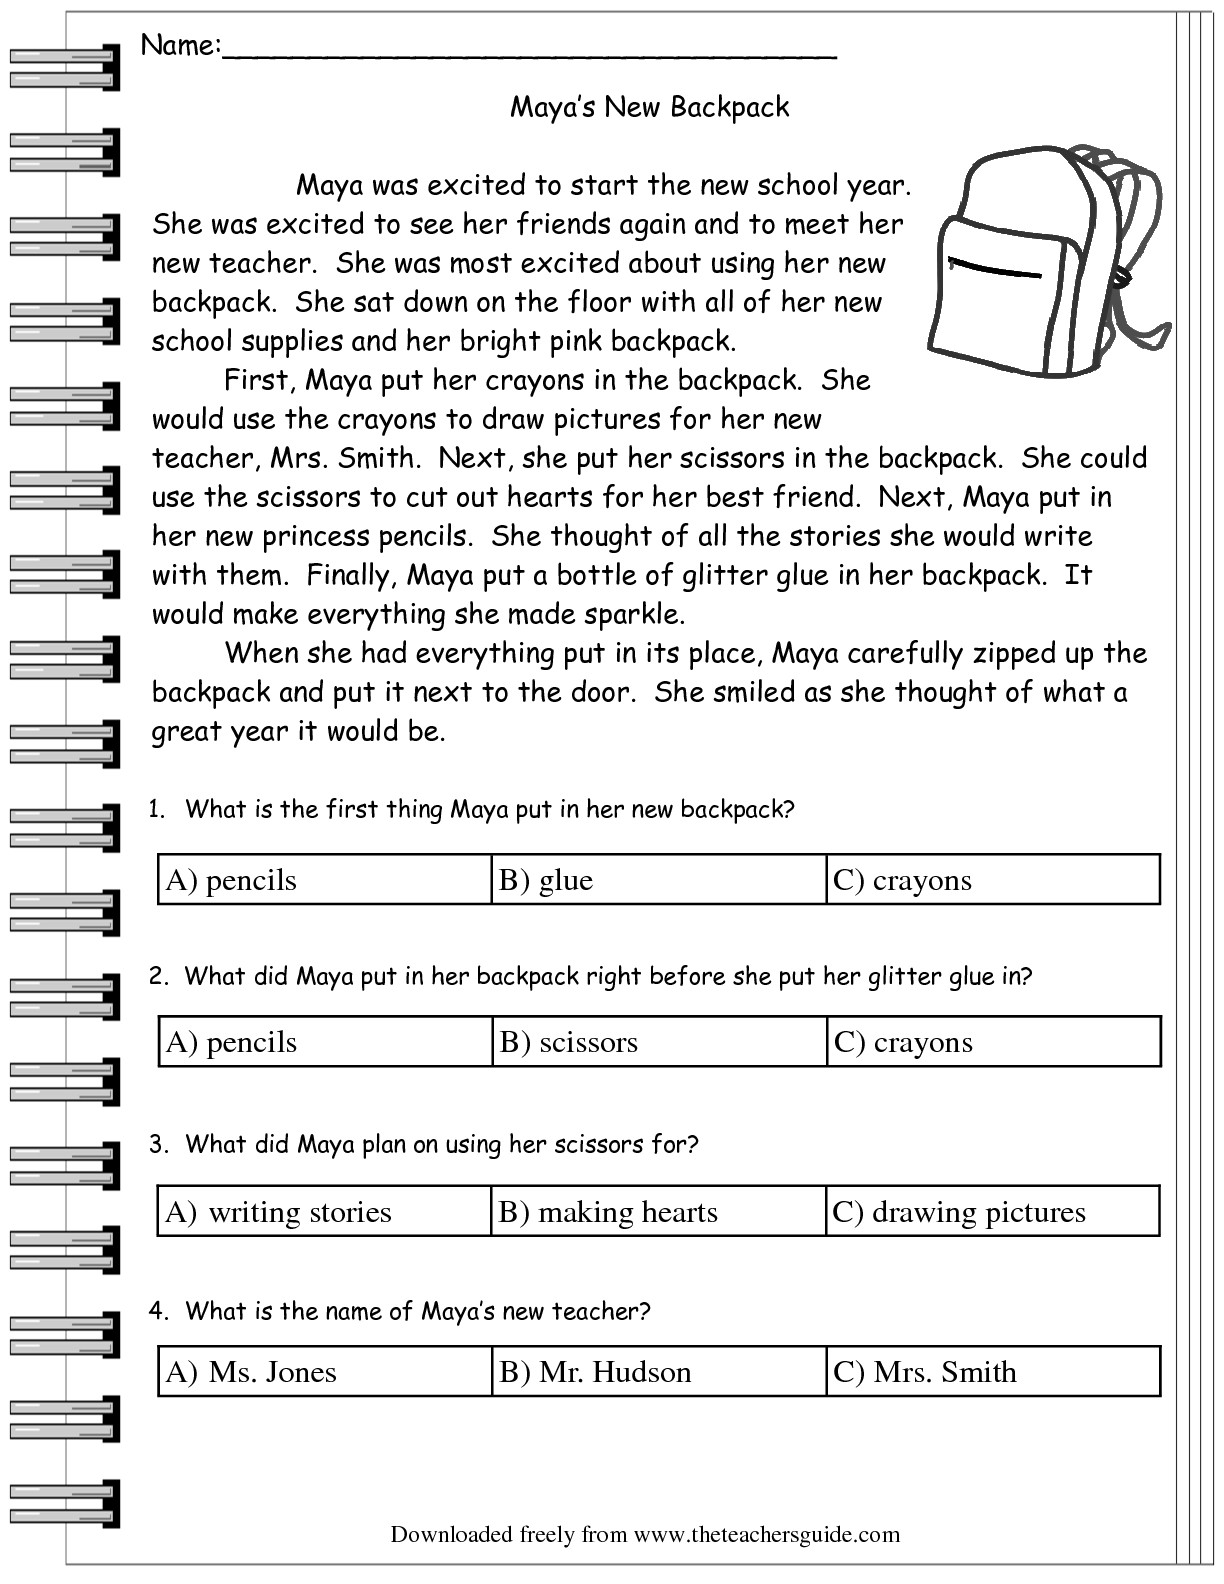 7-best-images-of-multiple-choice-worksheets-for-2nd-grade-printable-reading-comprehension